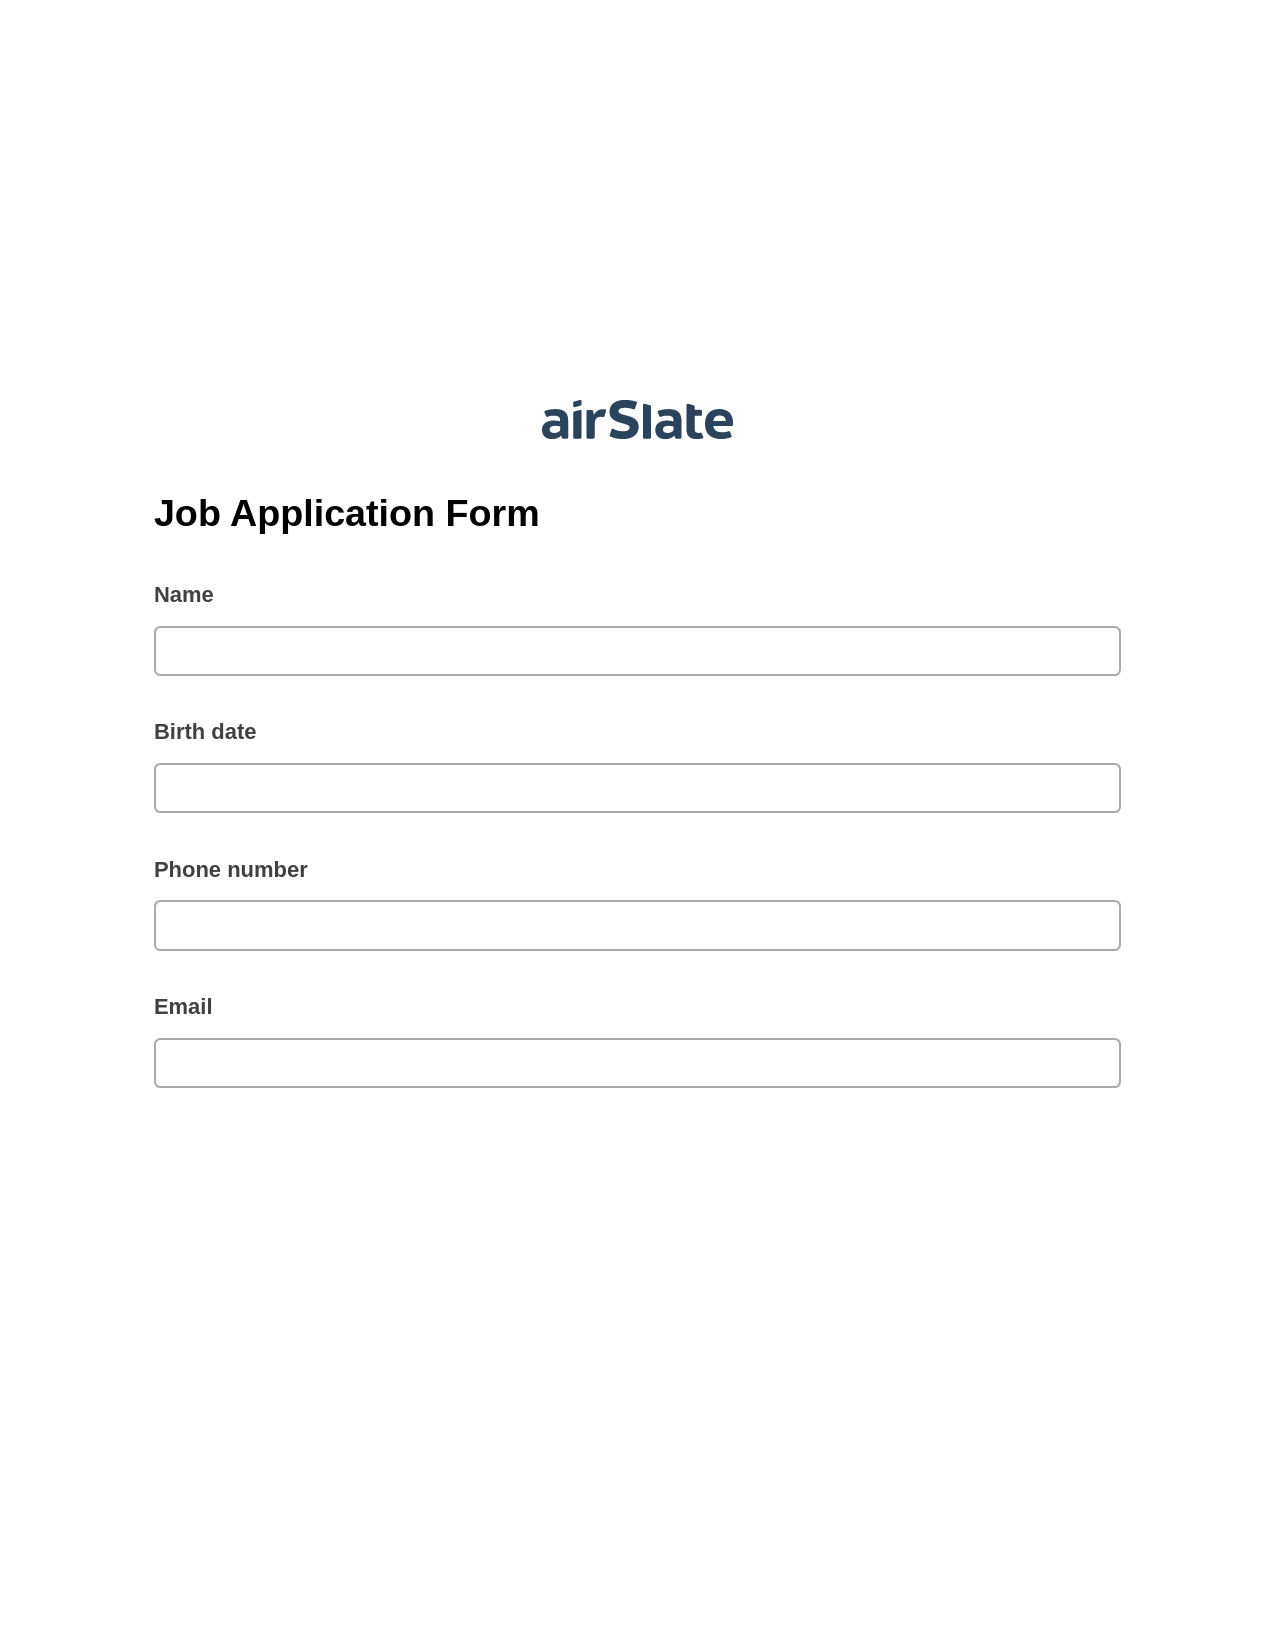 Multirole Job Application Form Pre-fill from Google Sheets Bot, Update NetSuite Records Bot, Export to Google Sheet Bot